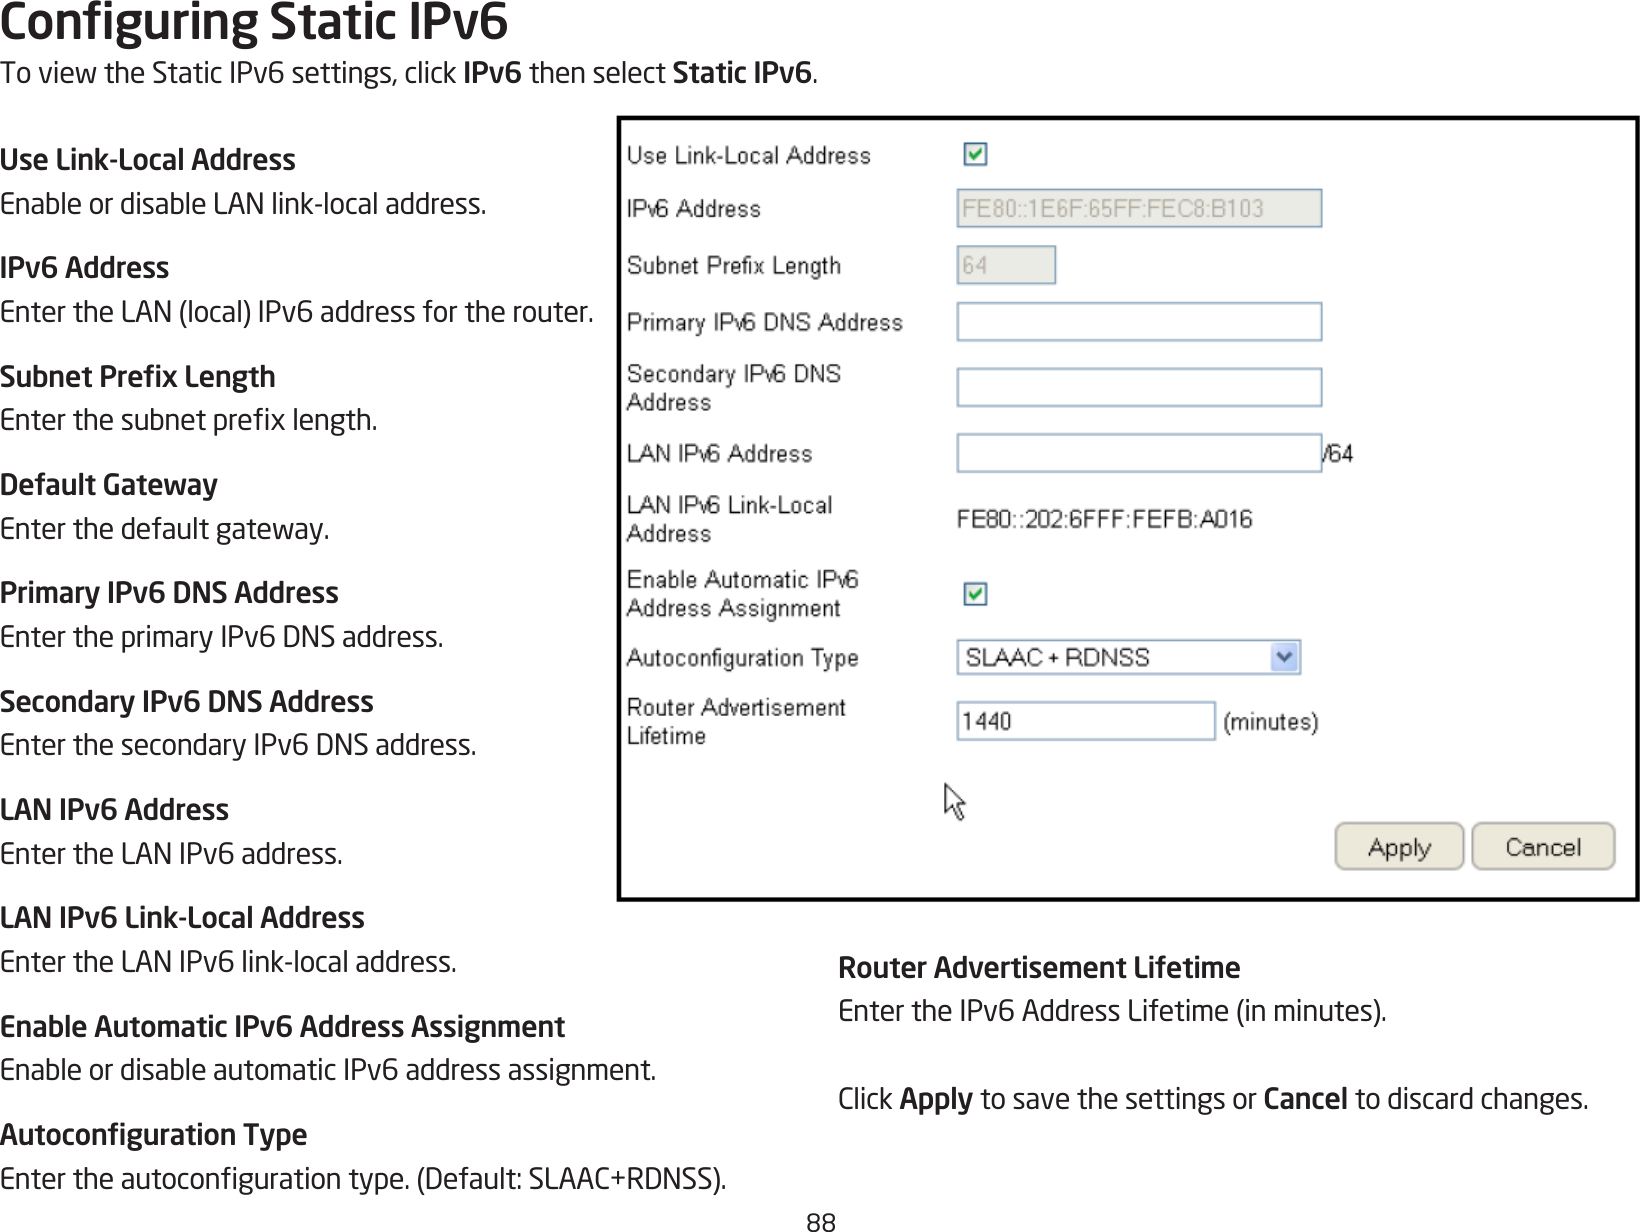 88Conguring Static IPv6ToviewtheStaticIPv6settings,clickIPv6 then select Static IPv6.Use Link-Local AddressEnableordisableLANlink-localaddress.IPv6 AddressEntertheLAN(local)IPv6addressfortherouter.Subnet Prex LengthEnterthesubnetprexlength.Default GatewayEnterthedefaultgateway.Primary IPv6 DNS AddressEntertheprimaryIPv6DNSaddress.Secondary IPv6 DNS AddressEnterthesecondaryIPv6DNSaddress.LAN IPv6 AddressEntertheLANIPv6address.LAN IPv6 Link-Local AddressEntertheLANIPv6link-localaddress.Enable Automatic IPv6 Address AssignmentEnableordisableautomaticIPv6addressassignment.Autoconguration TypeEntertheautocongurationtype.(Default:SLAAC+RDNSS).Router Advertisement LifetimeEntertheIPv6AddressLifetime(inminutes).ClickApply to save the settings or Cancel to discard changes.